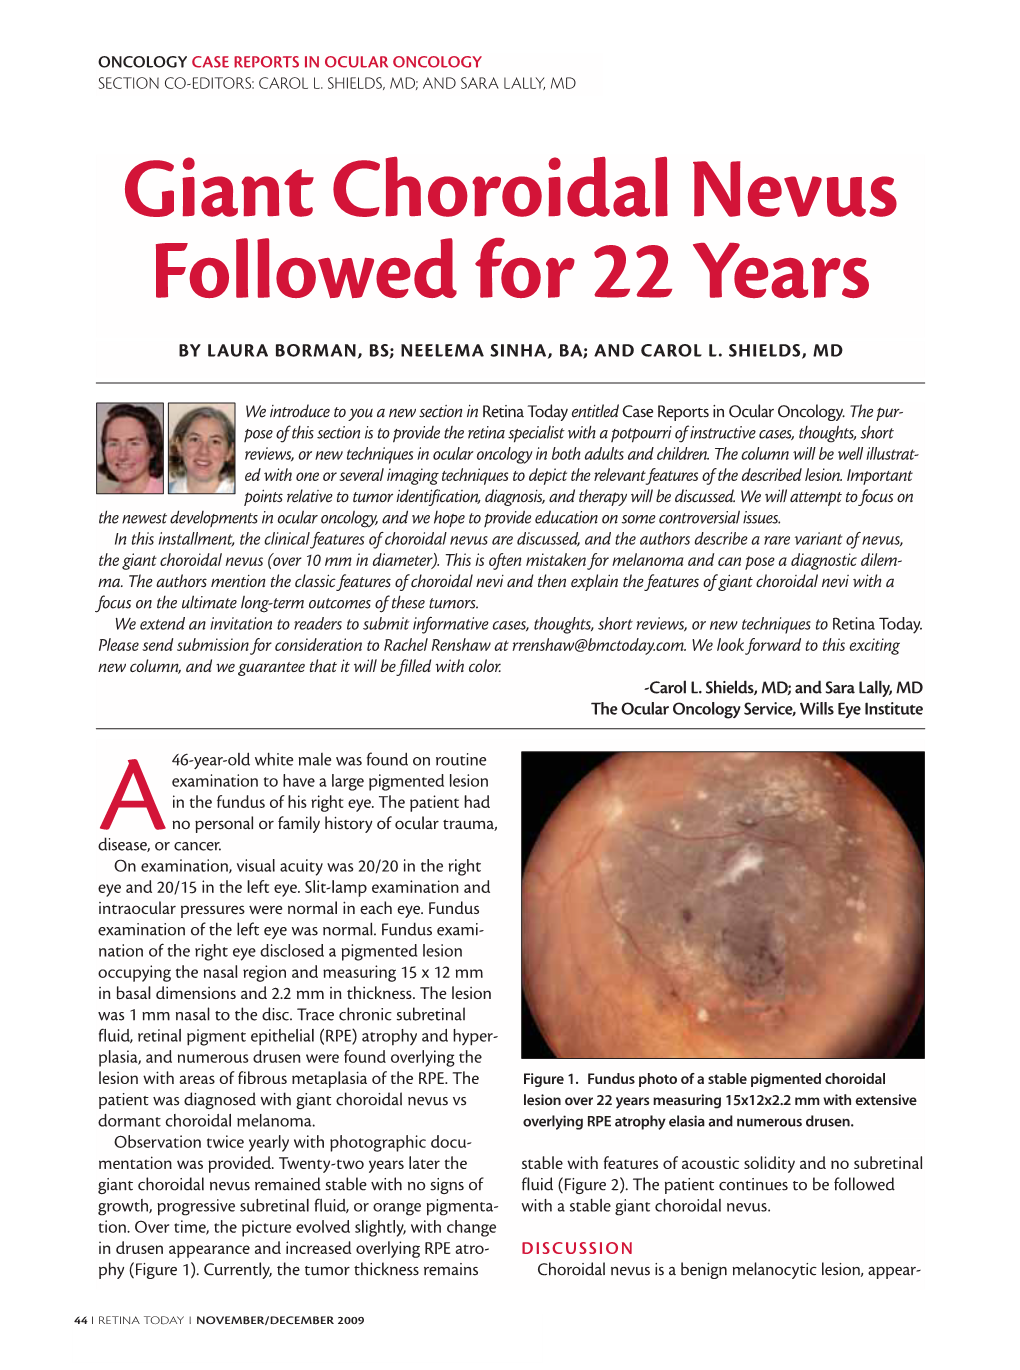 Giant Choroidal Nevus Followed for 22 Years